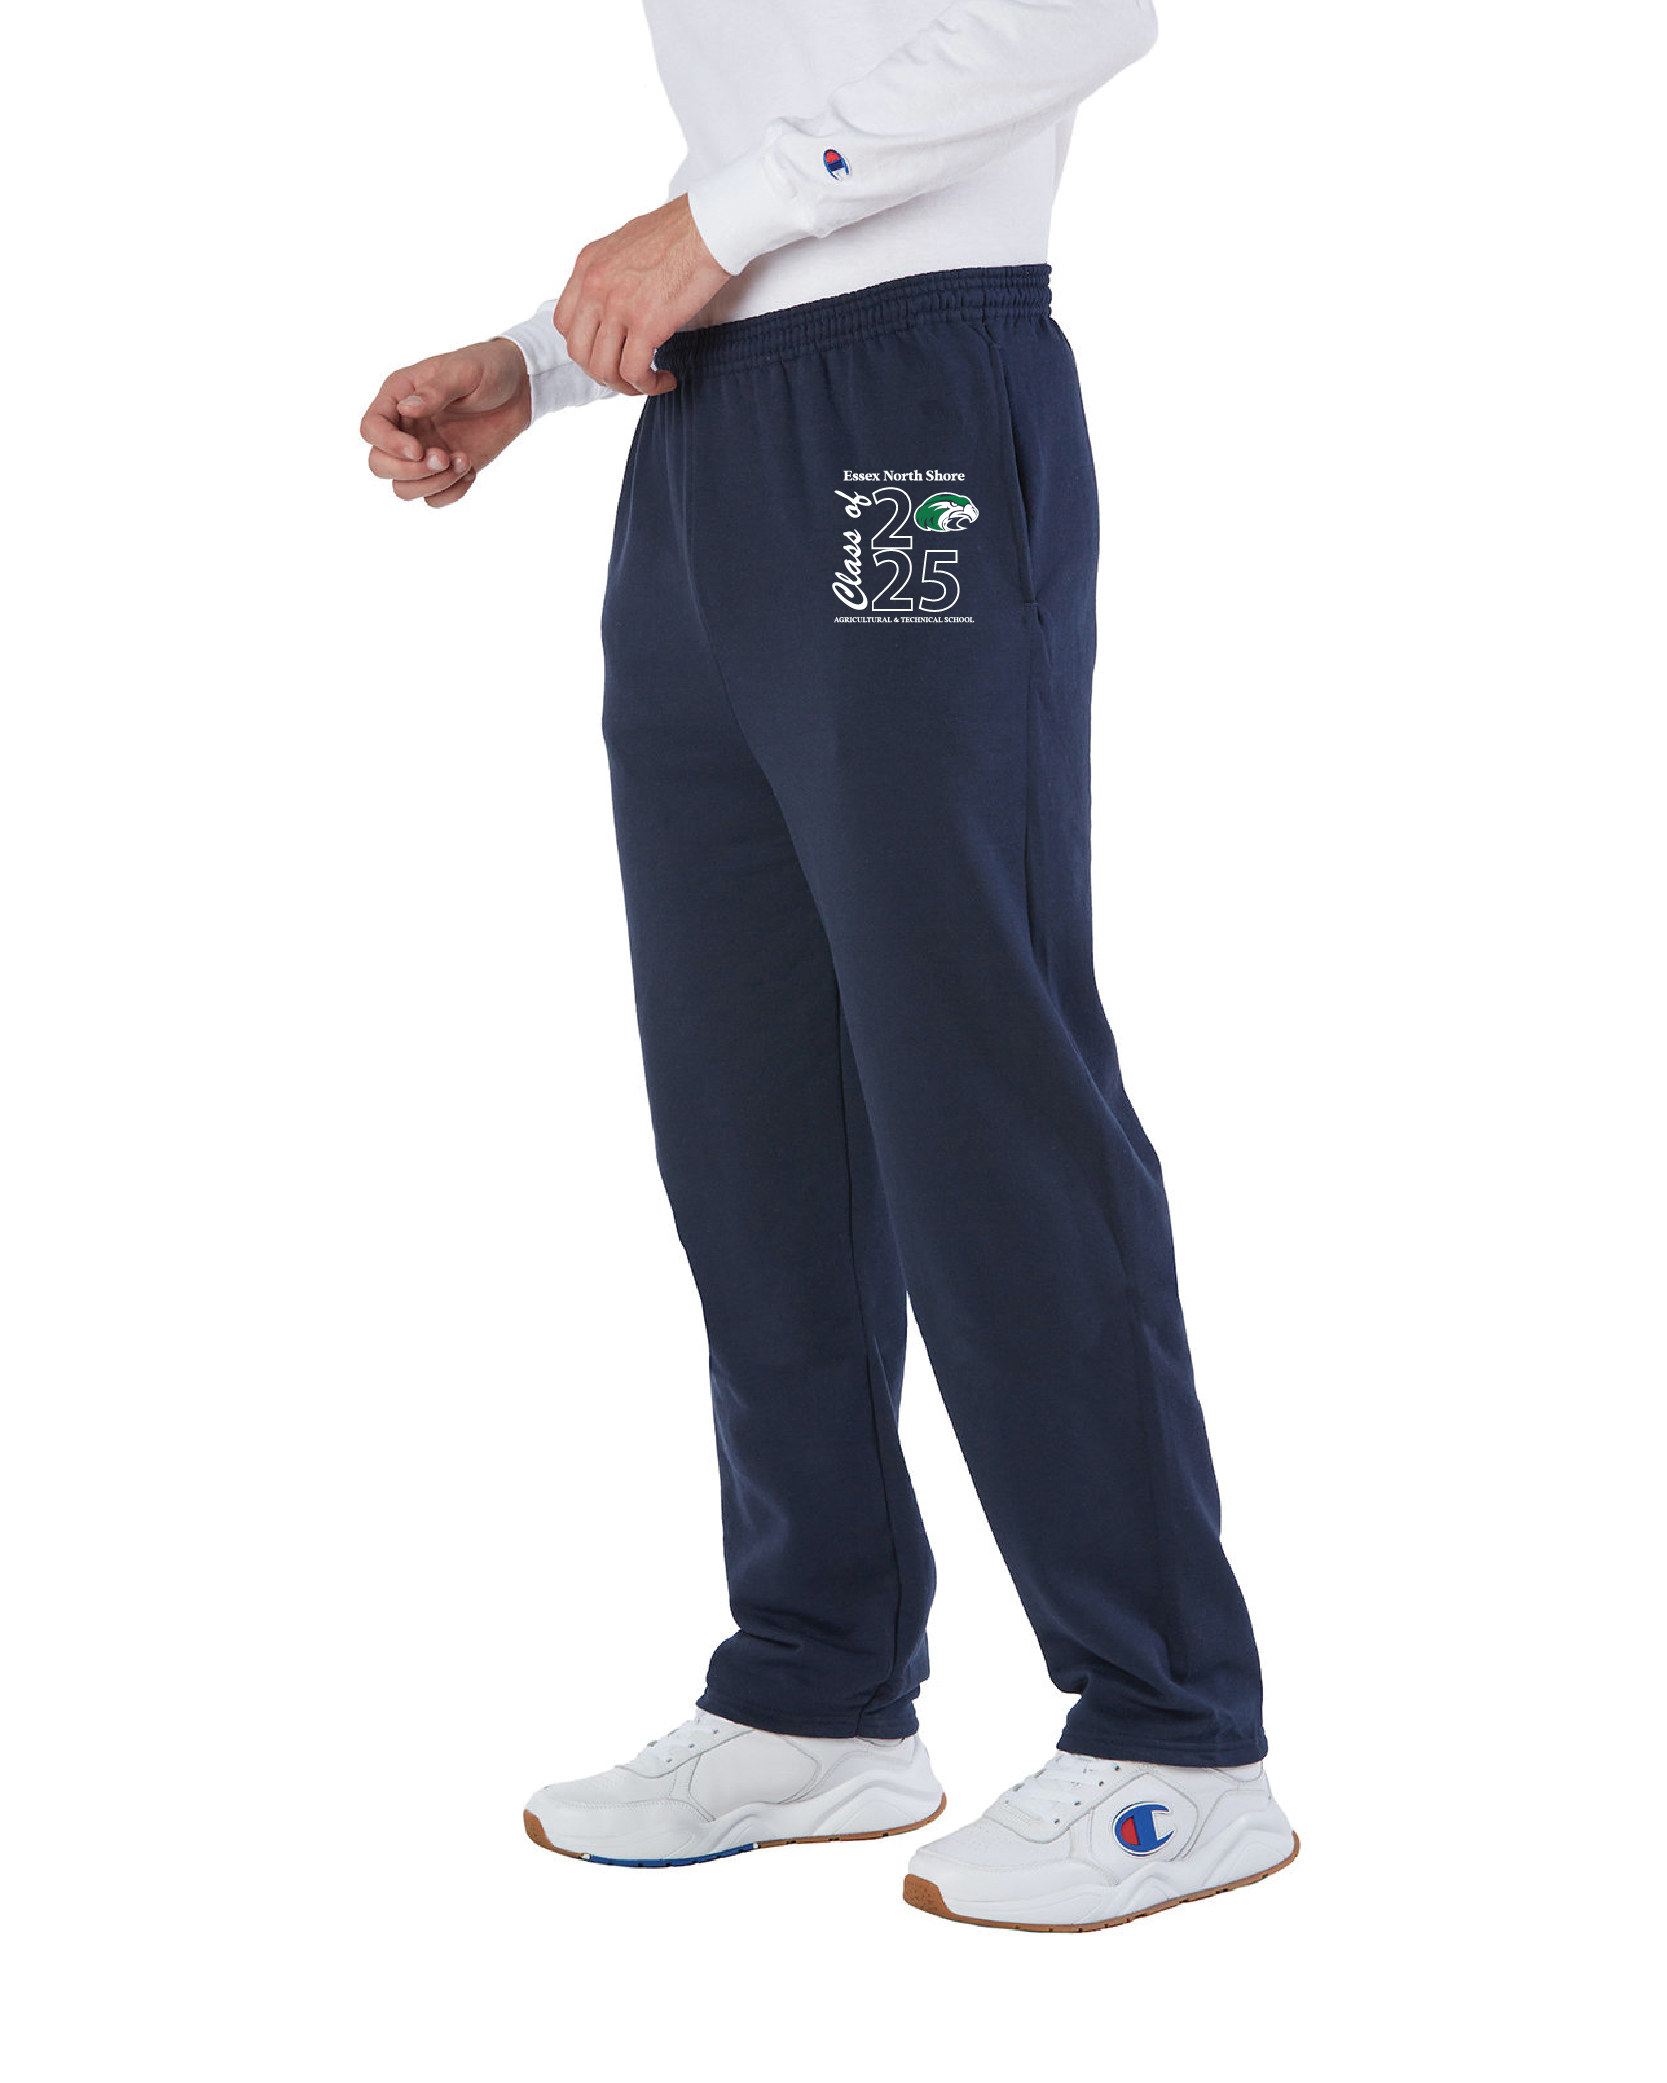 Essex North Shore PTO CLASS OF 2025 Core Fleece Sweatpant with Pockets